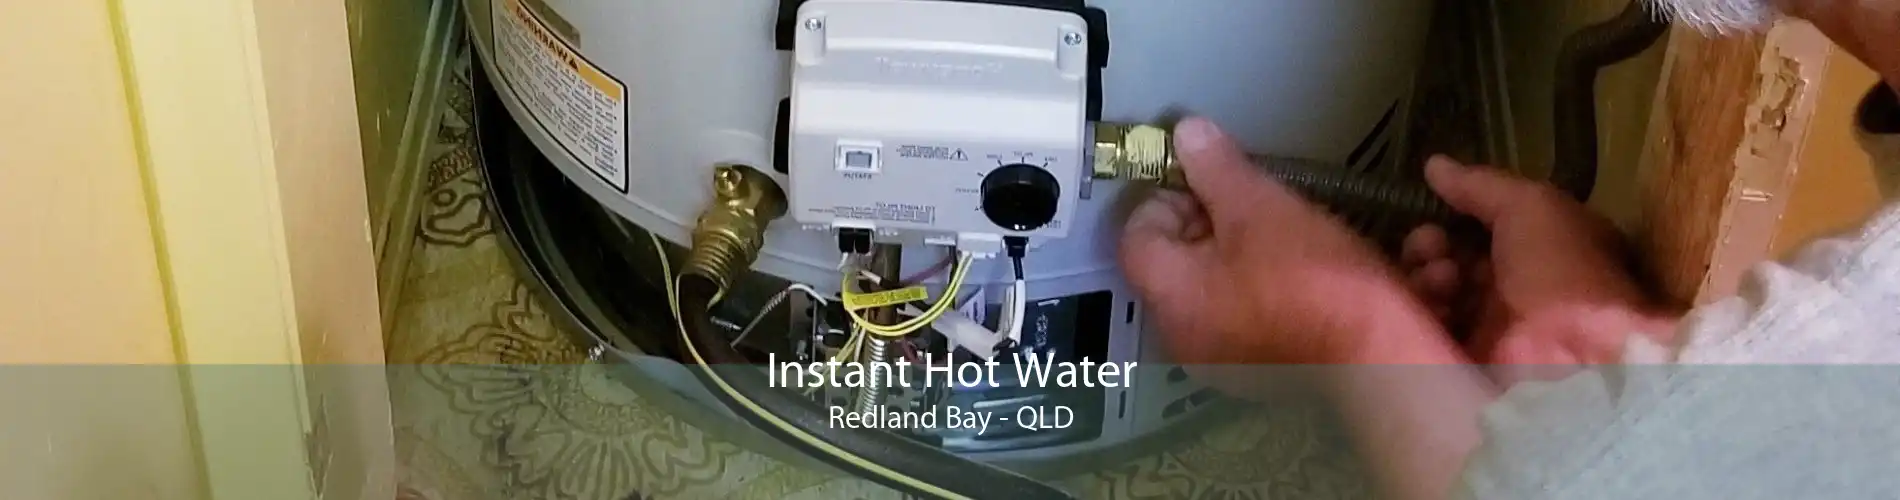 Instant Hot Water Redland Bay - QLD